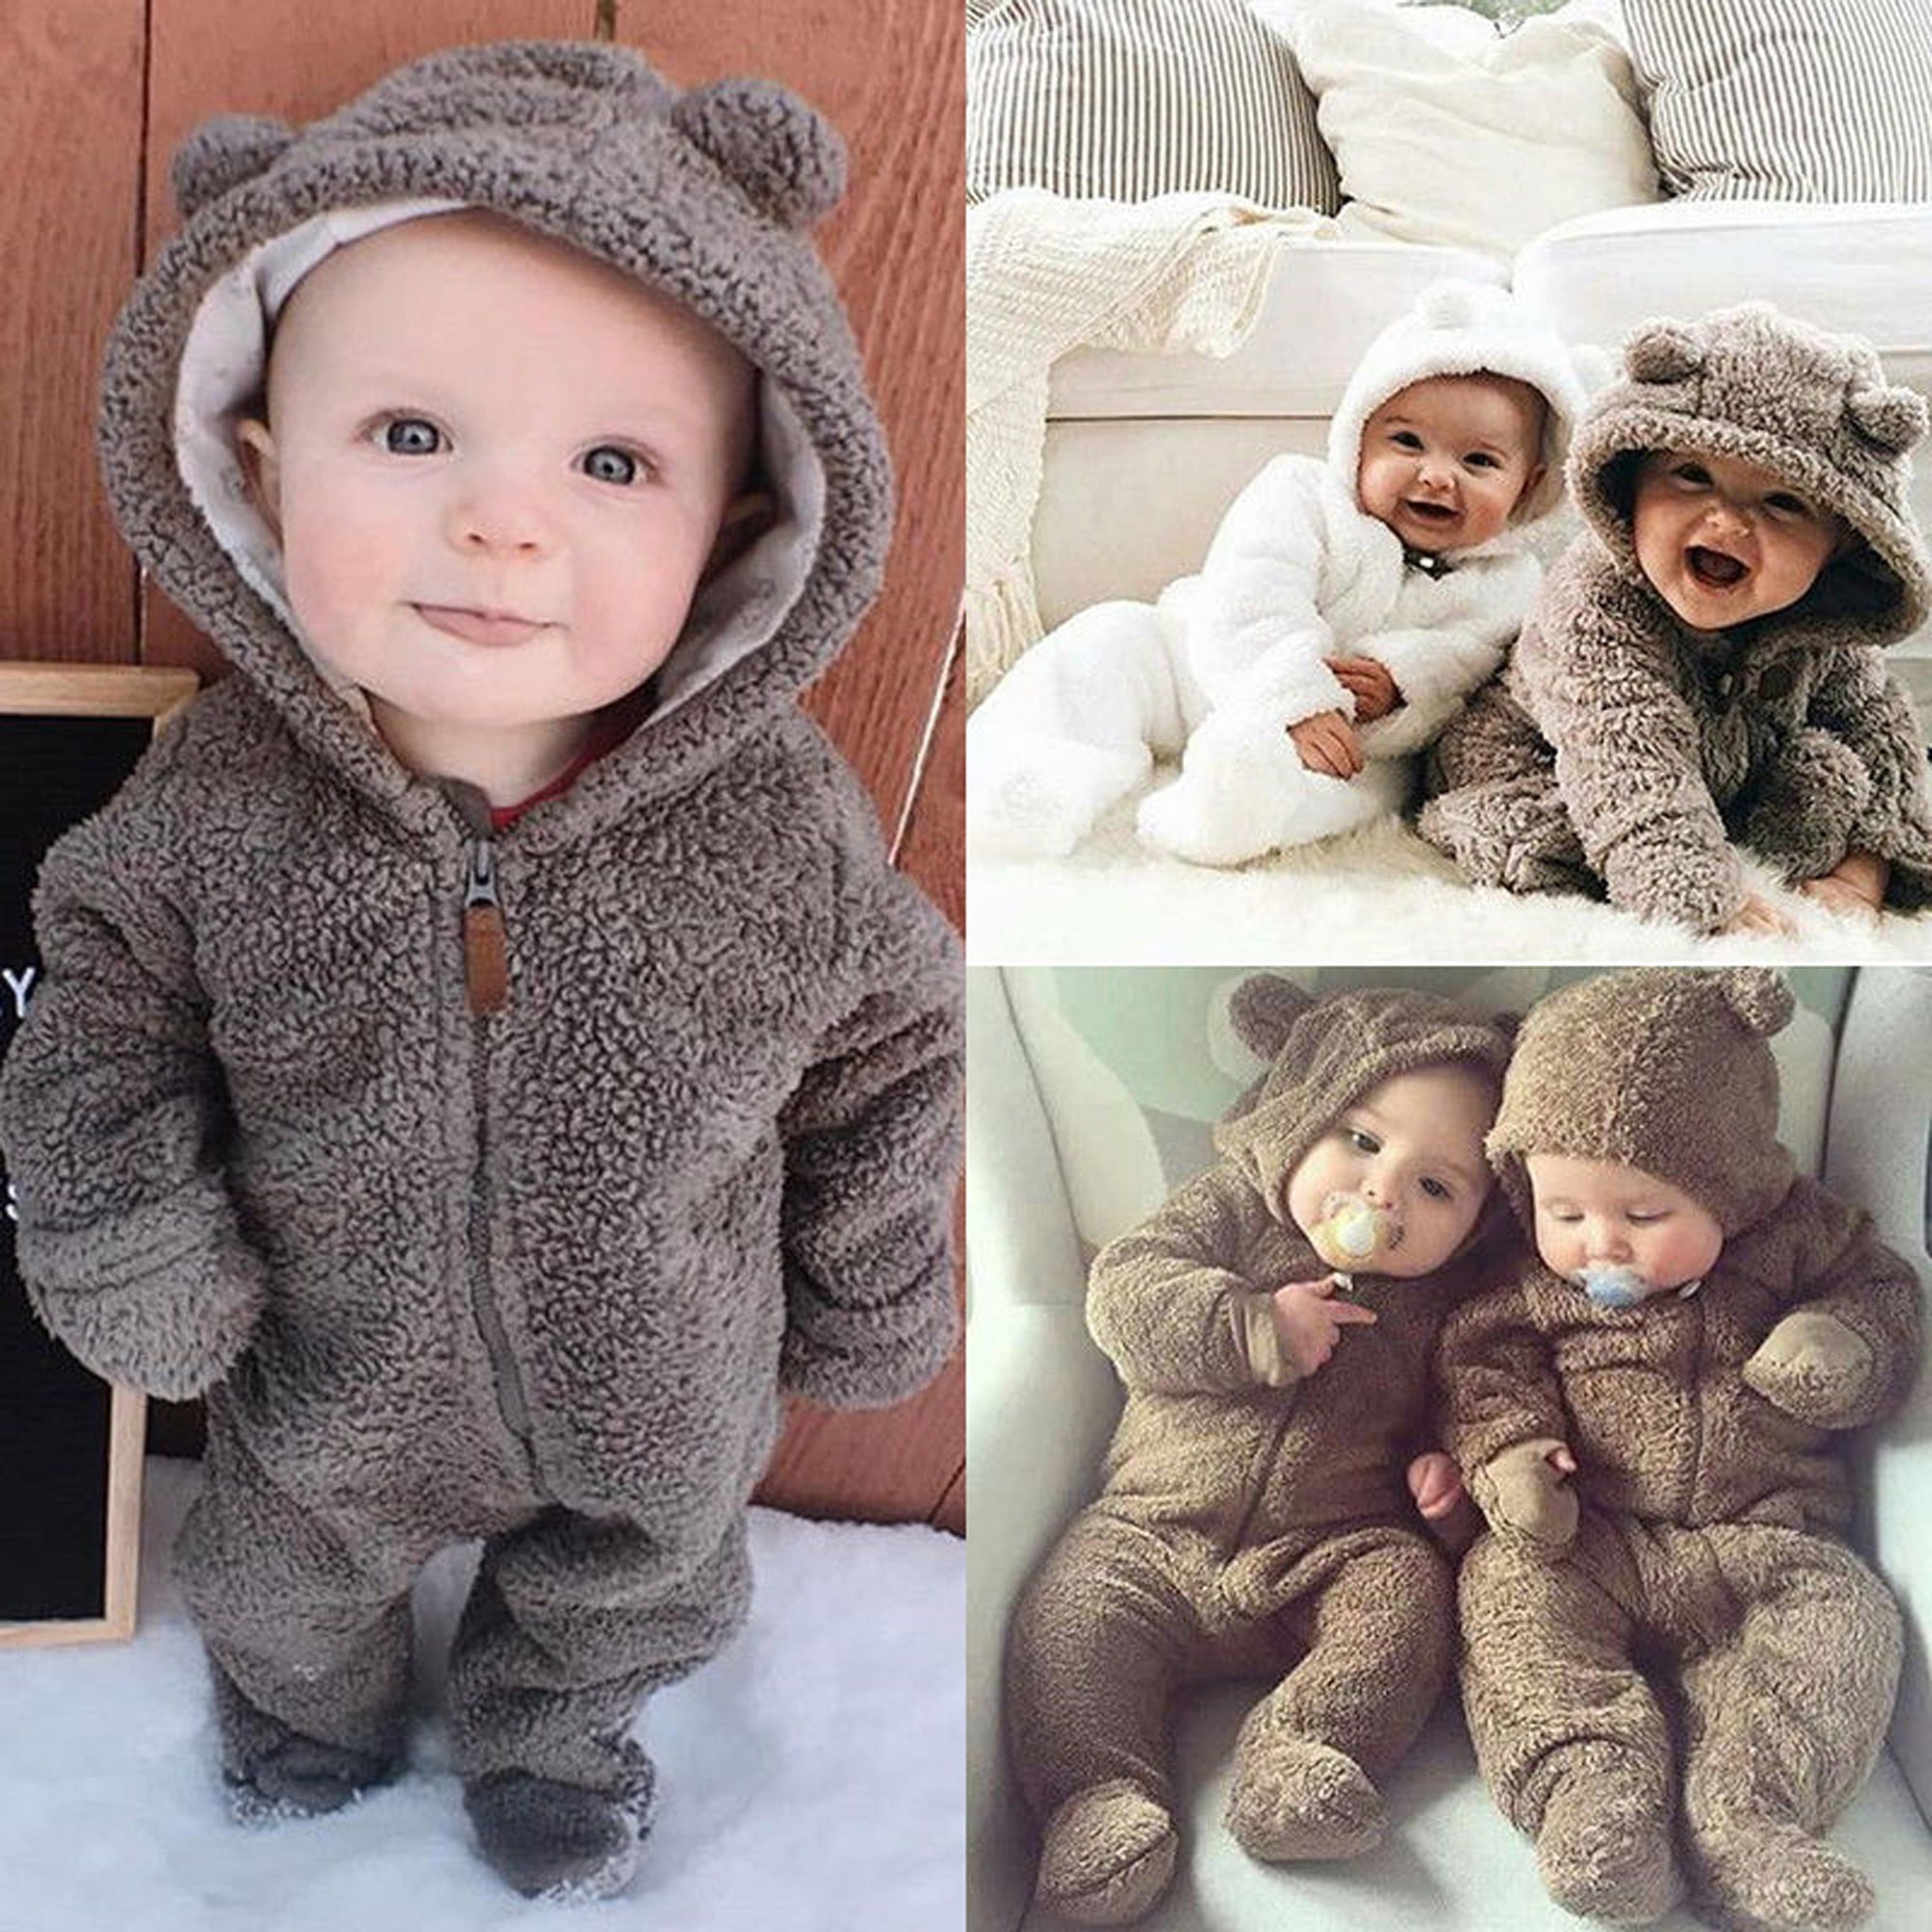 Xshuai for 0-24 Months Kids Newborn Infant Toddler Baby Boys Girls Thicker Print Hooded Romper Jumpsuit Outfit Clothes Set 